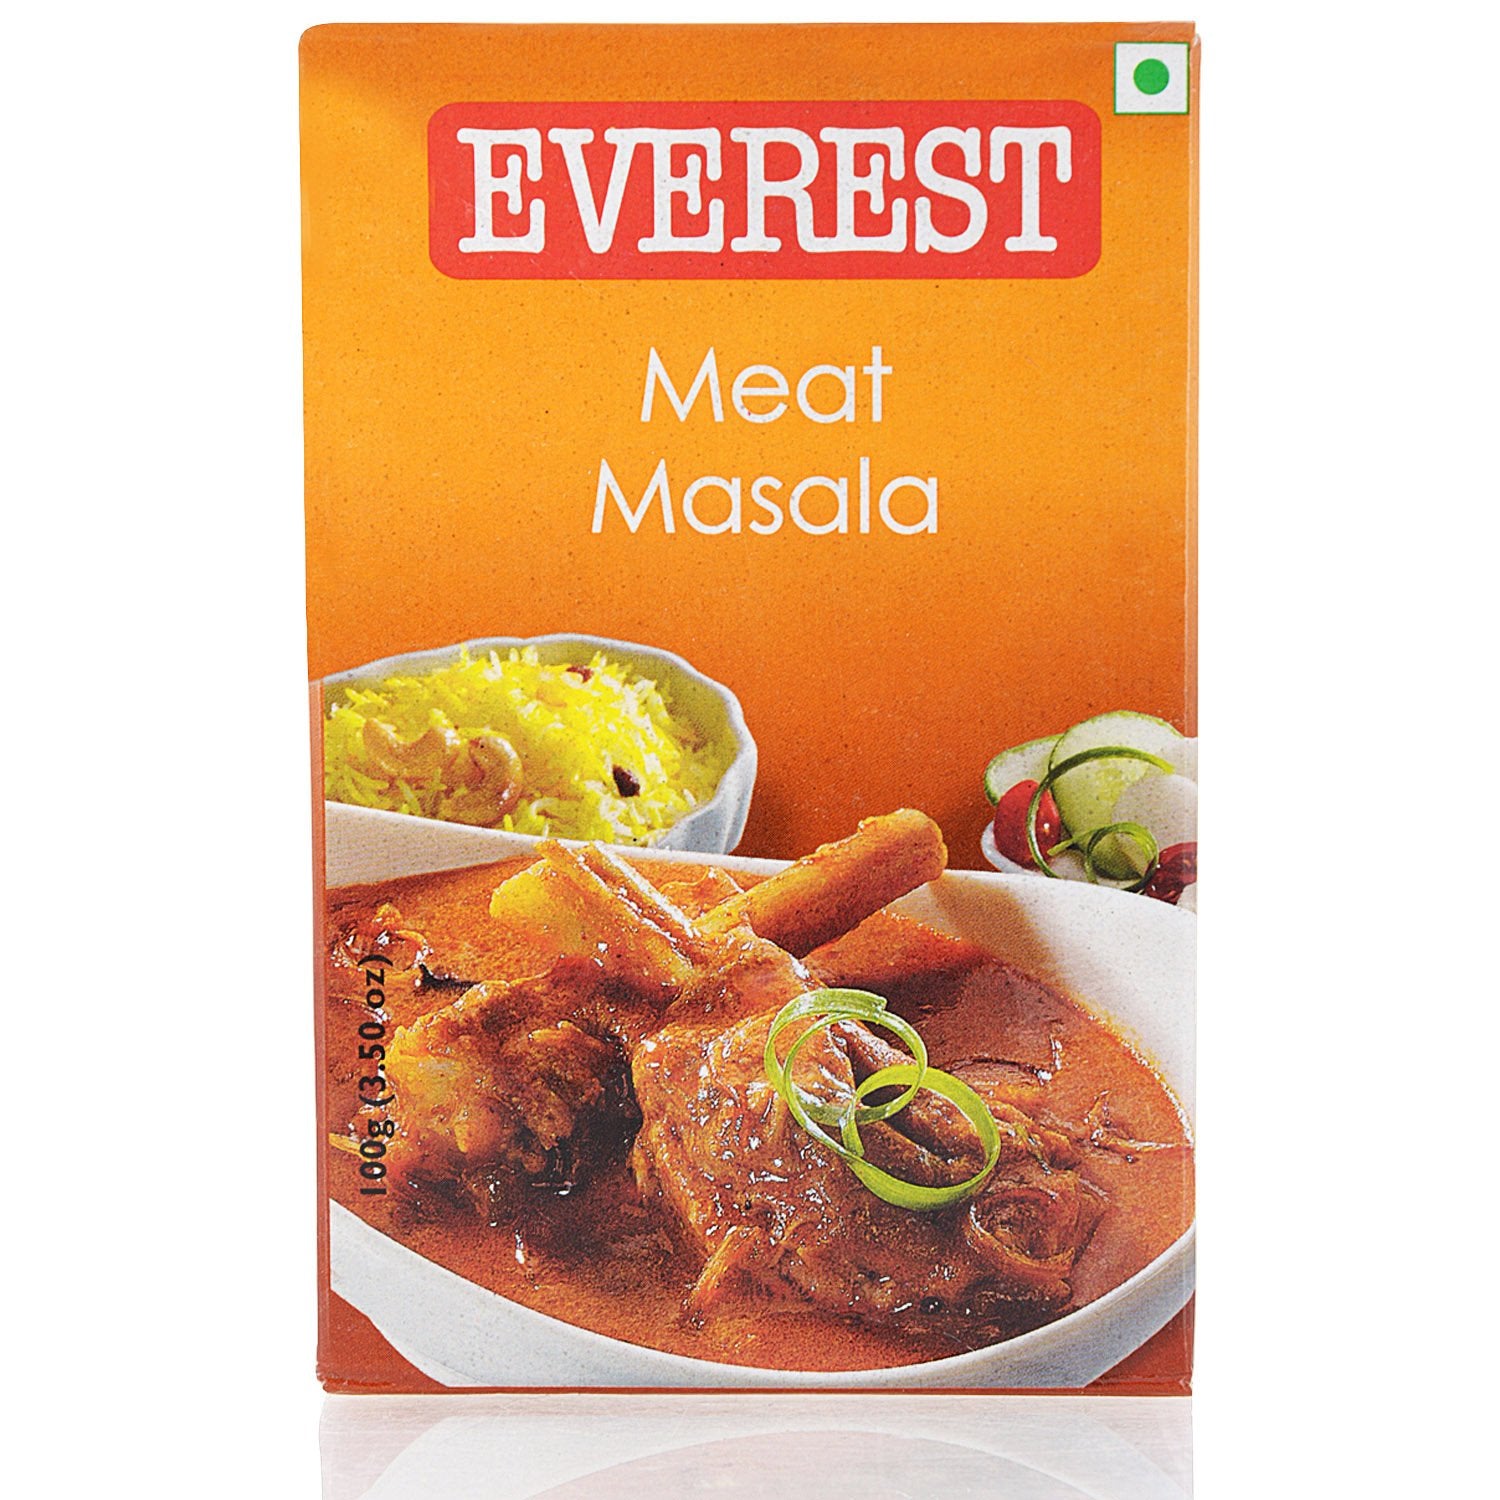 Everest Masala Powder - Meat ,100g (Pack of 2)